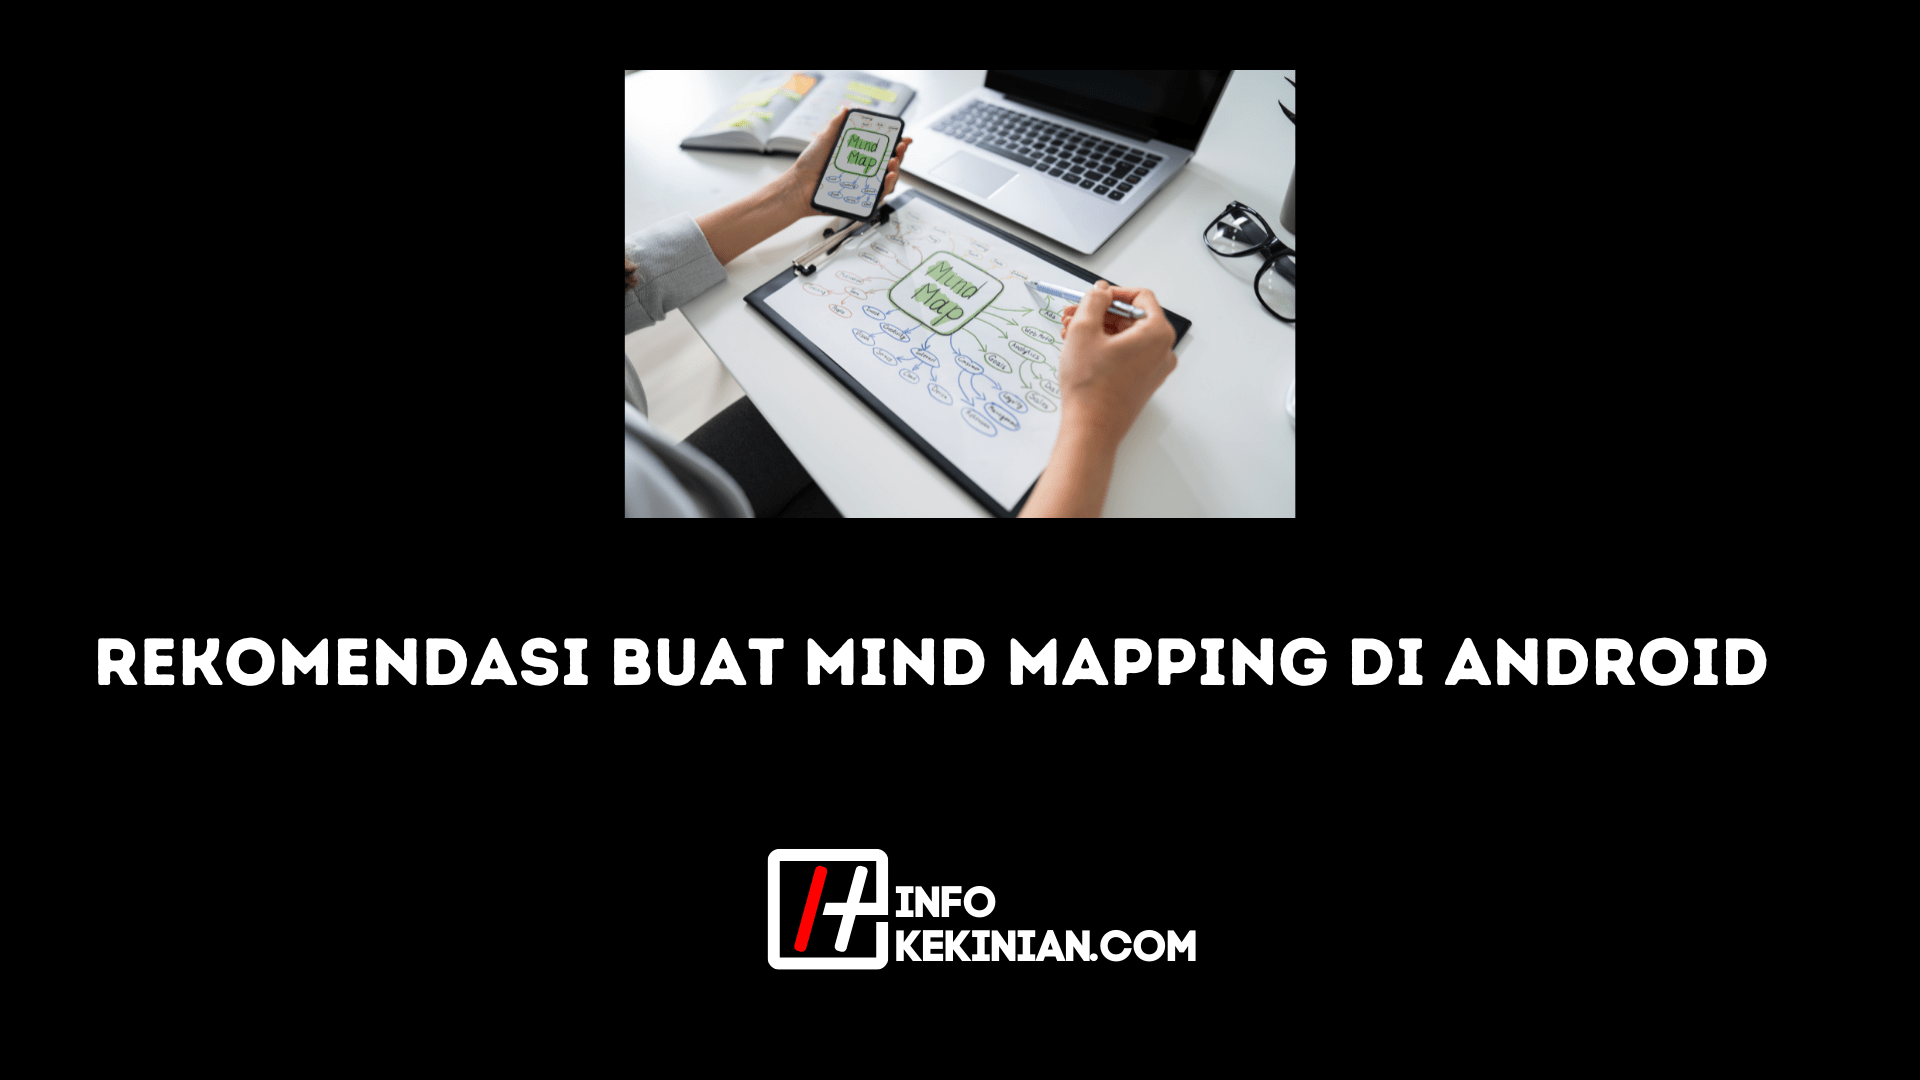 recommendations for mind mapping on android